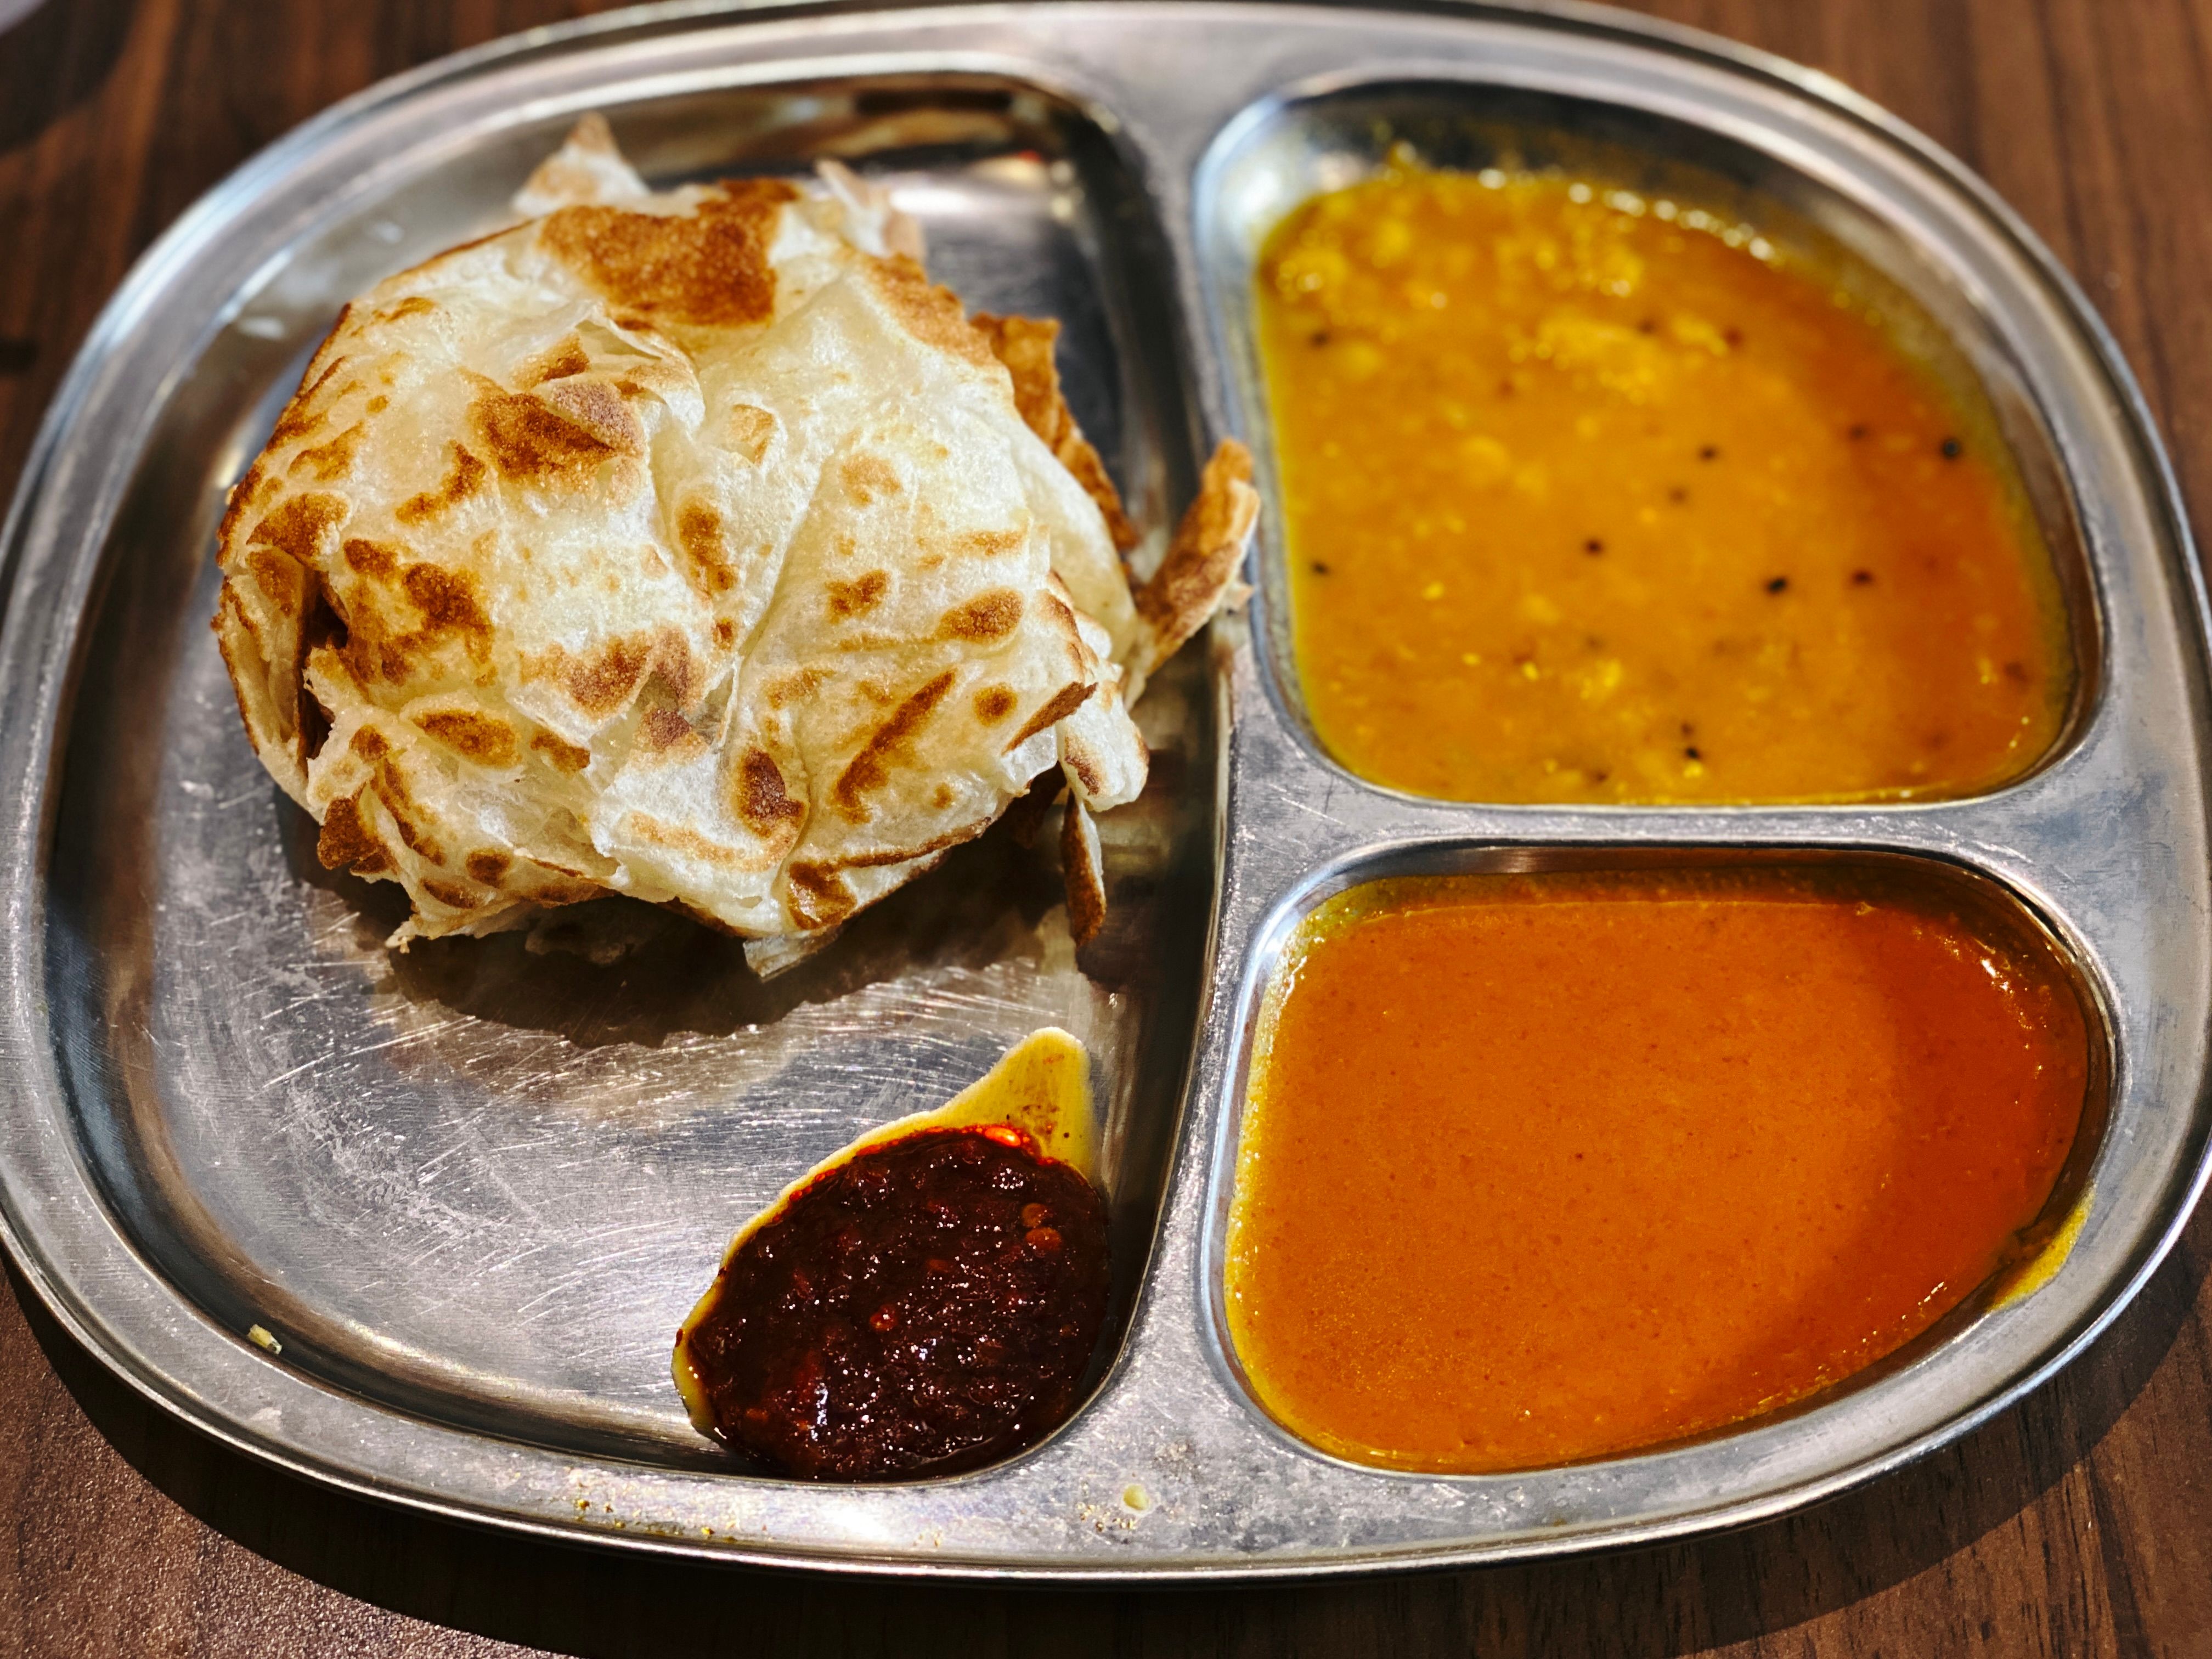 A photo of a three-section metal tray, the left has a roti canai which is a sort of fluffy balled-up pastry thing and a dollop of sambal sauce, and the other two sections have two different types of curry sauce in them.